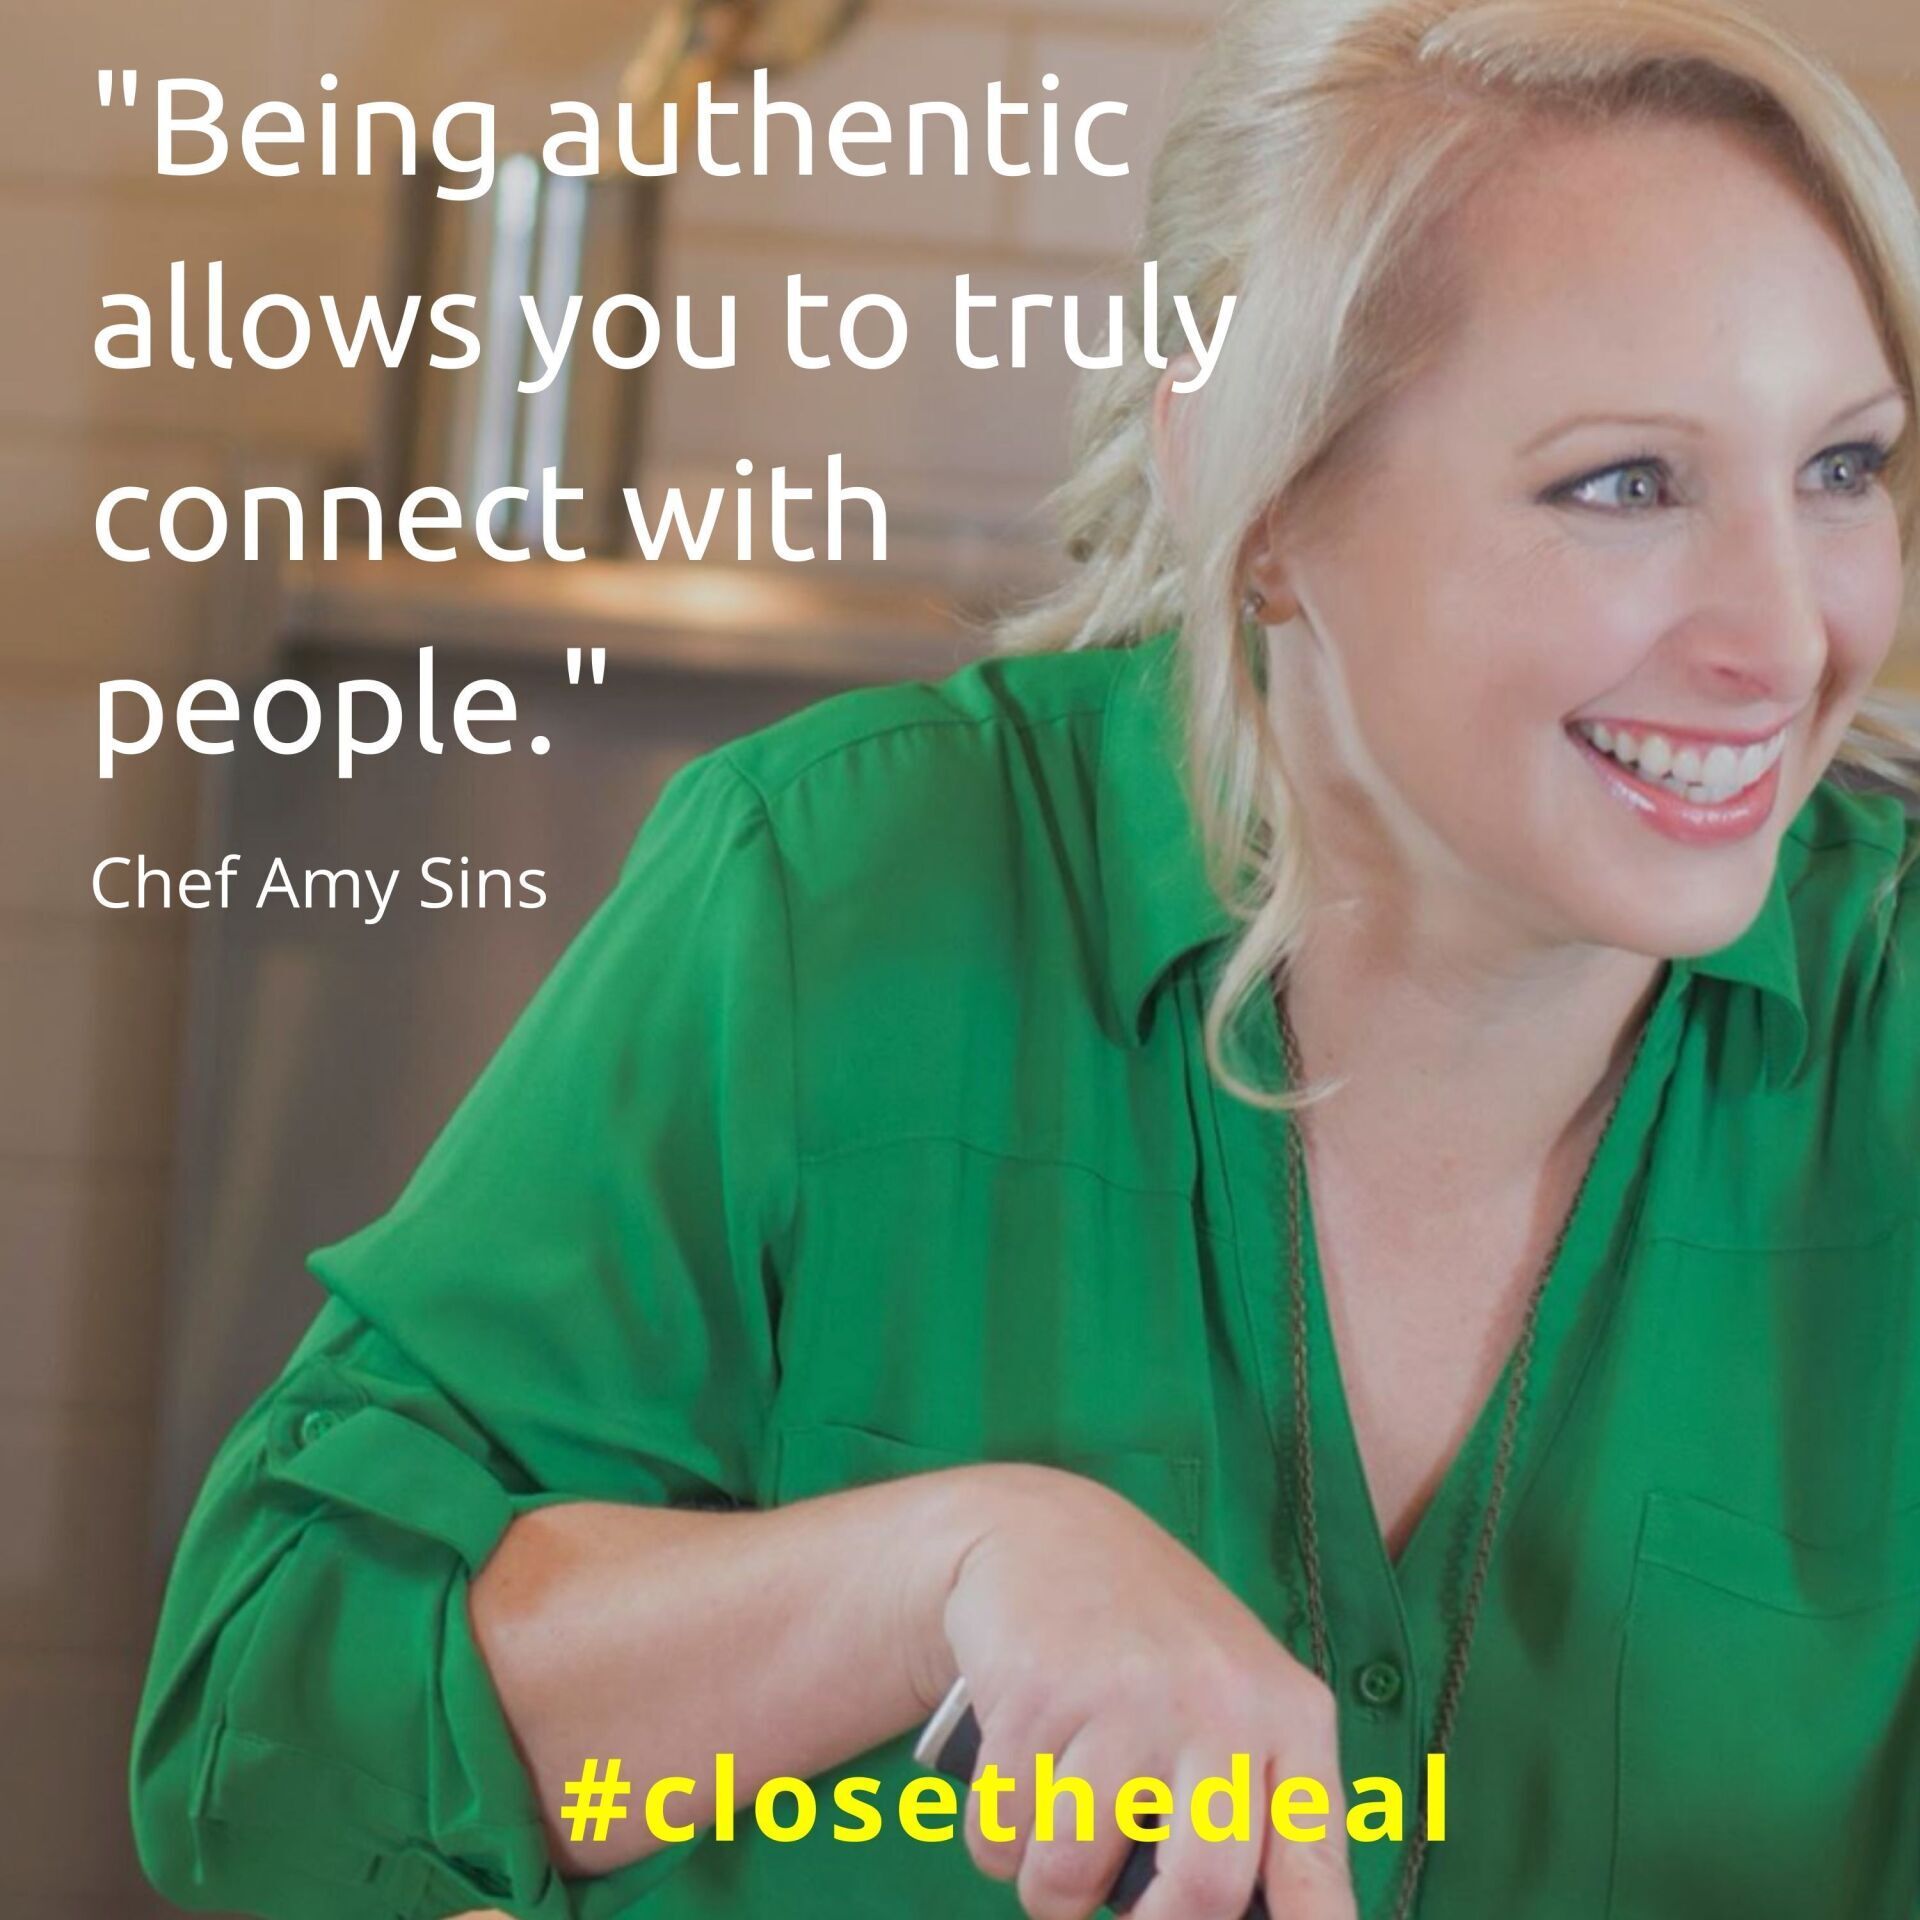 Chef Amy Sins quote  - Close The Deal.com